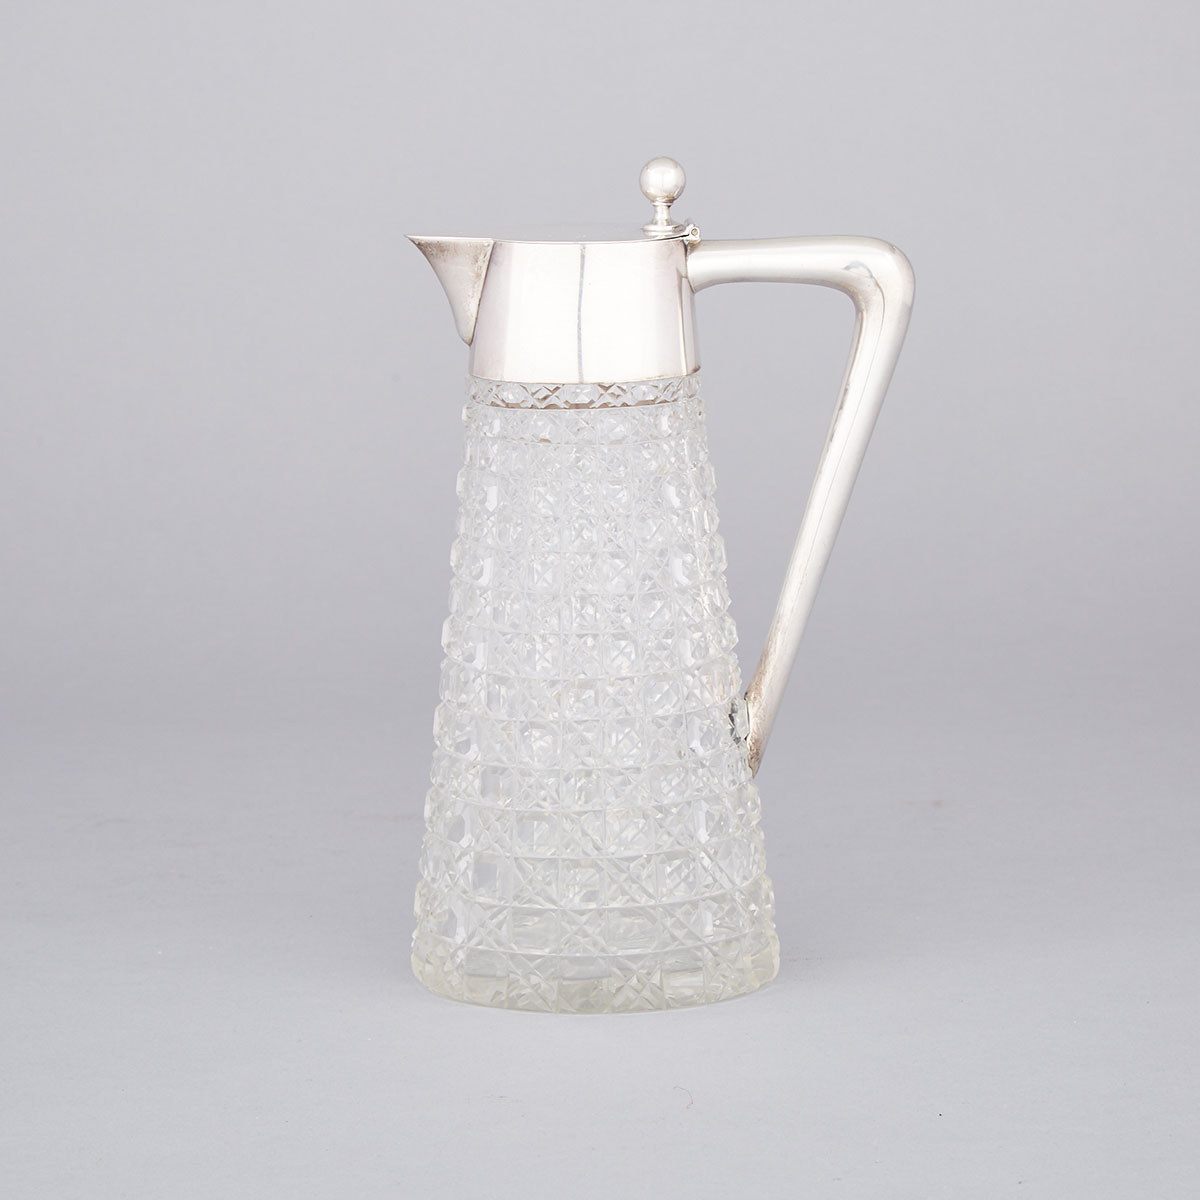 German Silver Mounted Cut Glass Claret Jug, early 20th century